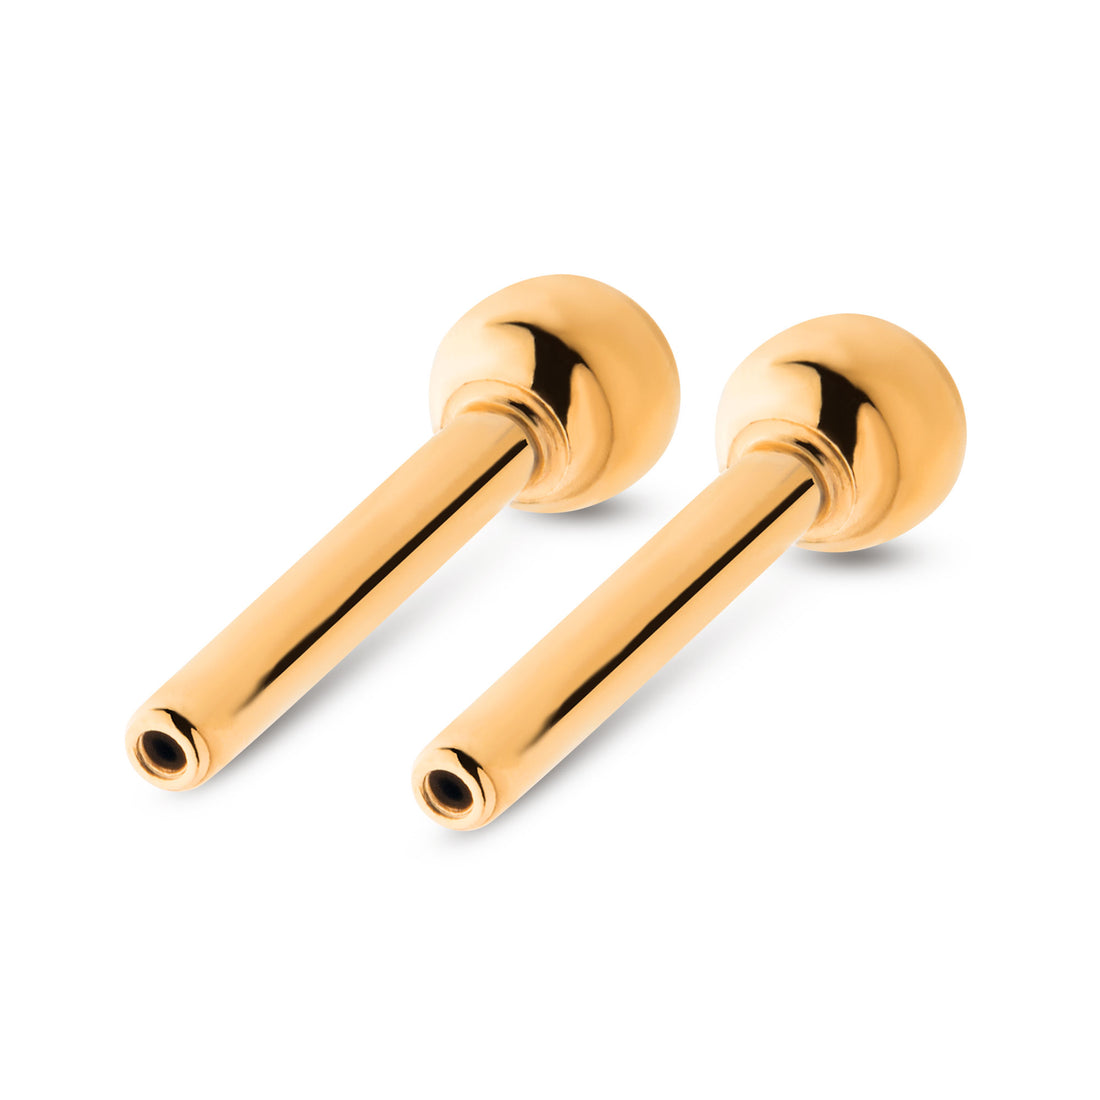 24KT Gold PVD Titanium Threadless Barbell with Single Attached Ball